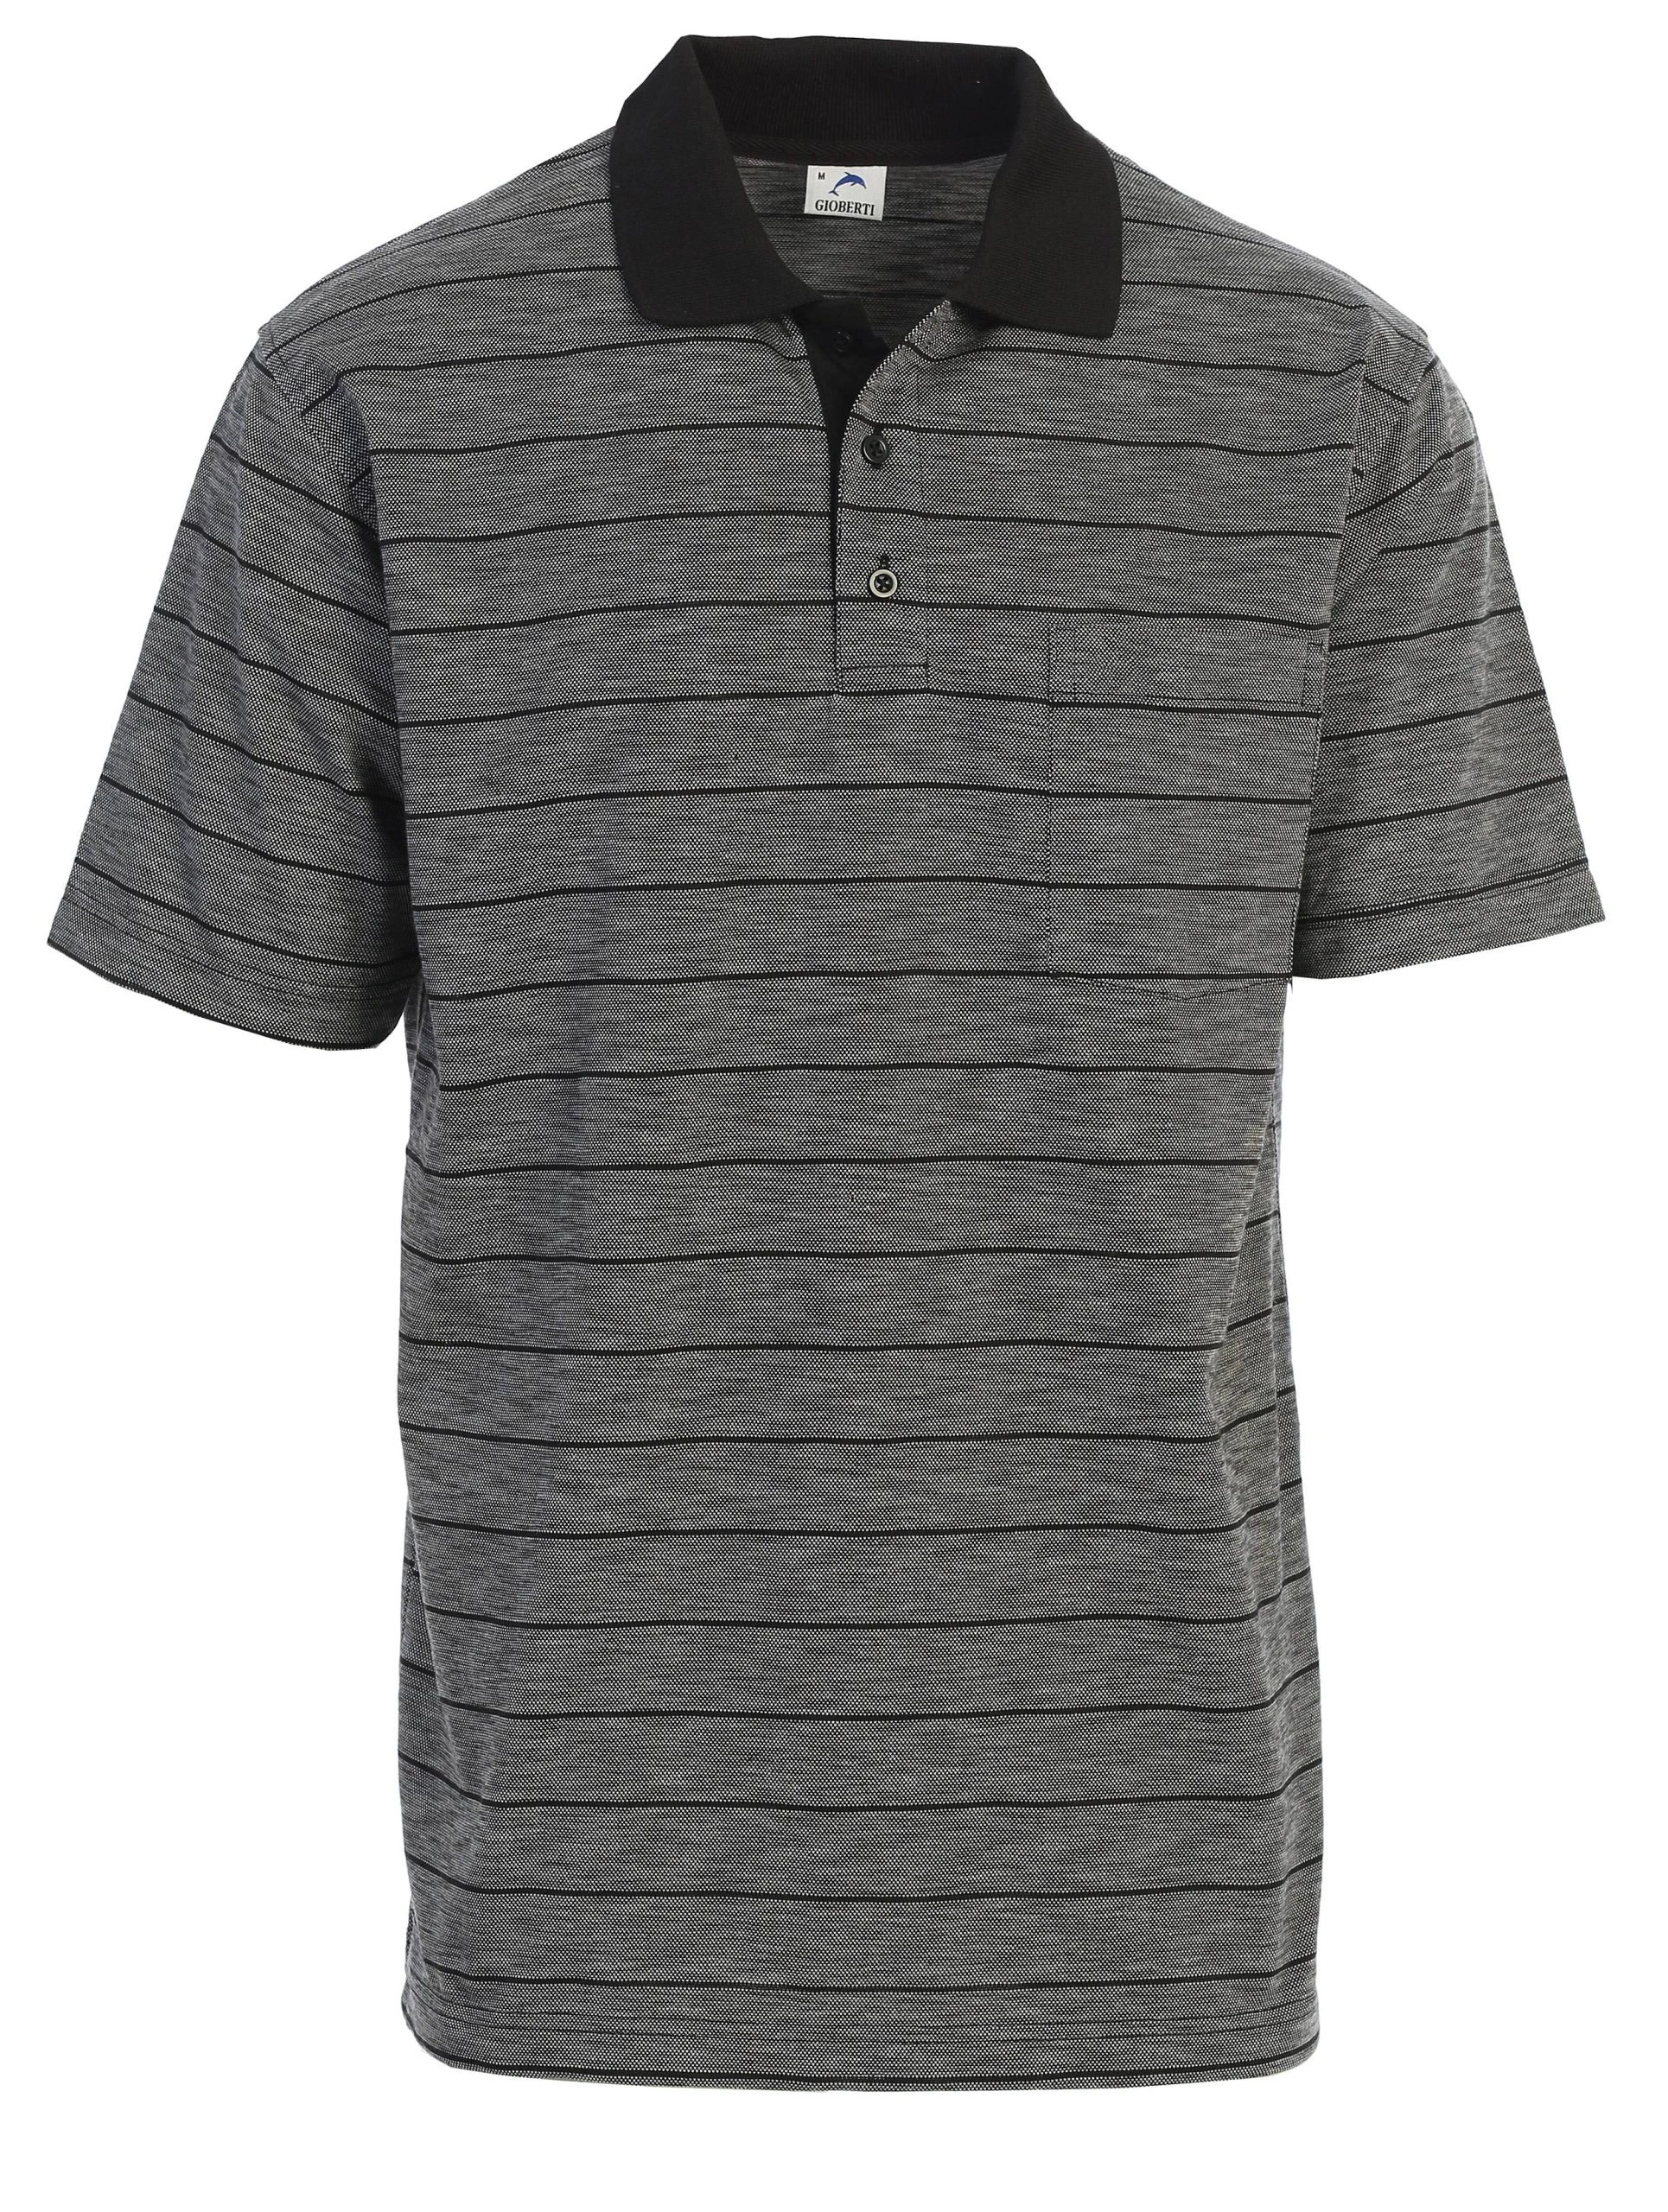 Wholesale Polo Shirt Supplier In Malaysia